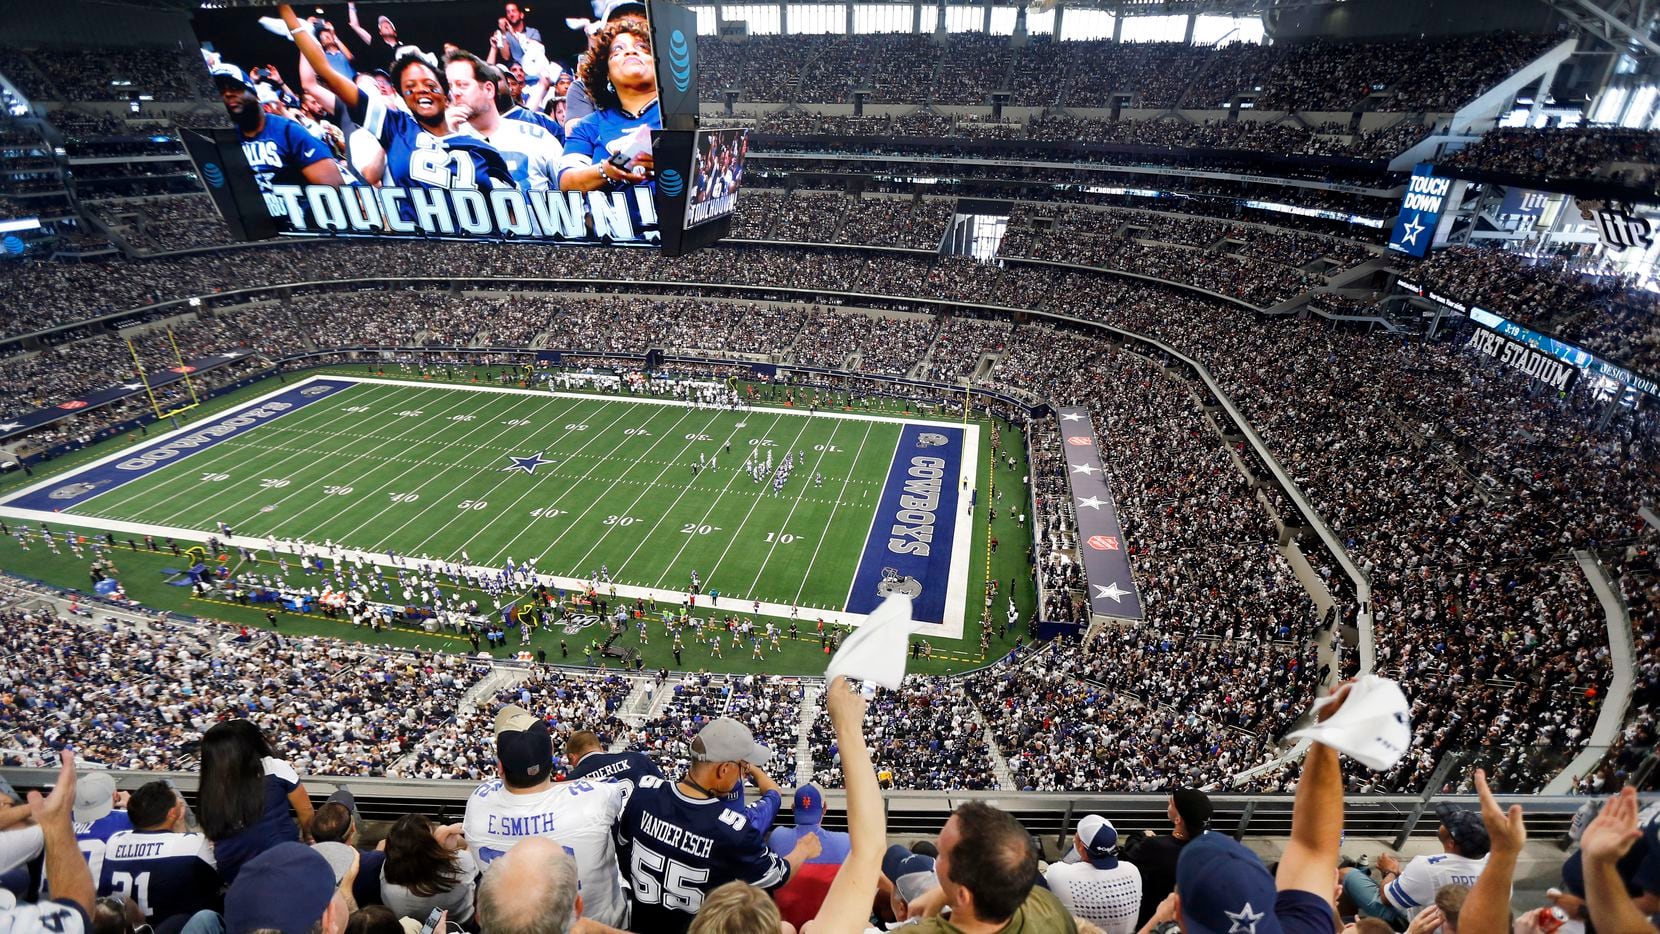 Fans are displayed on the giant overhead video screen as Dallas Cowboys fans cheer tight end Blake Jarwin's first quarter touchdown against the New York Giants at AT&T Stadium in Arlington, Texas, Sunday, September 8, 2019.